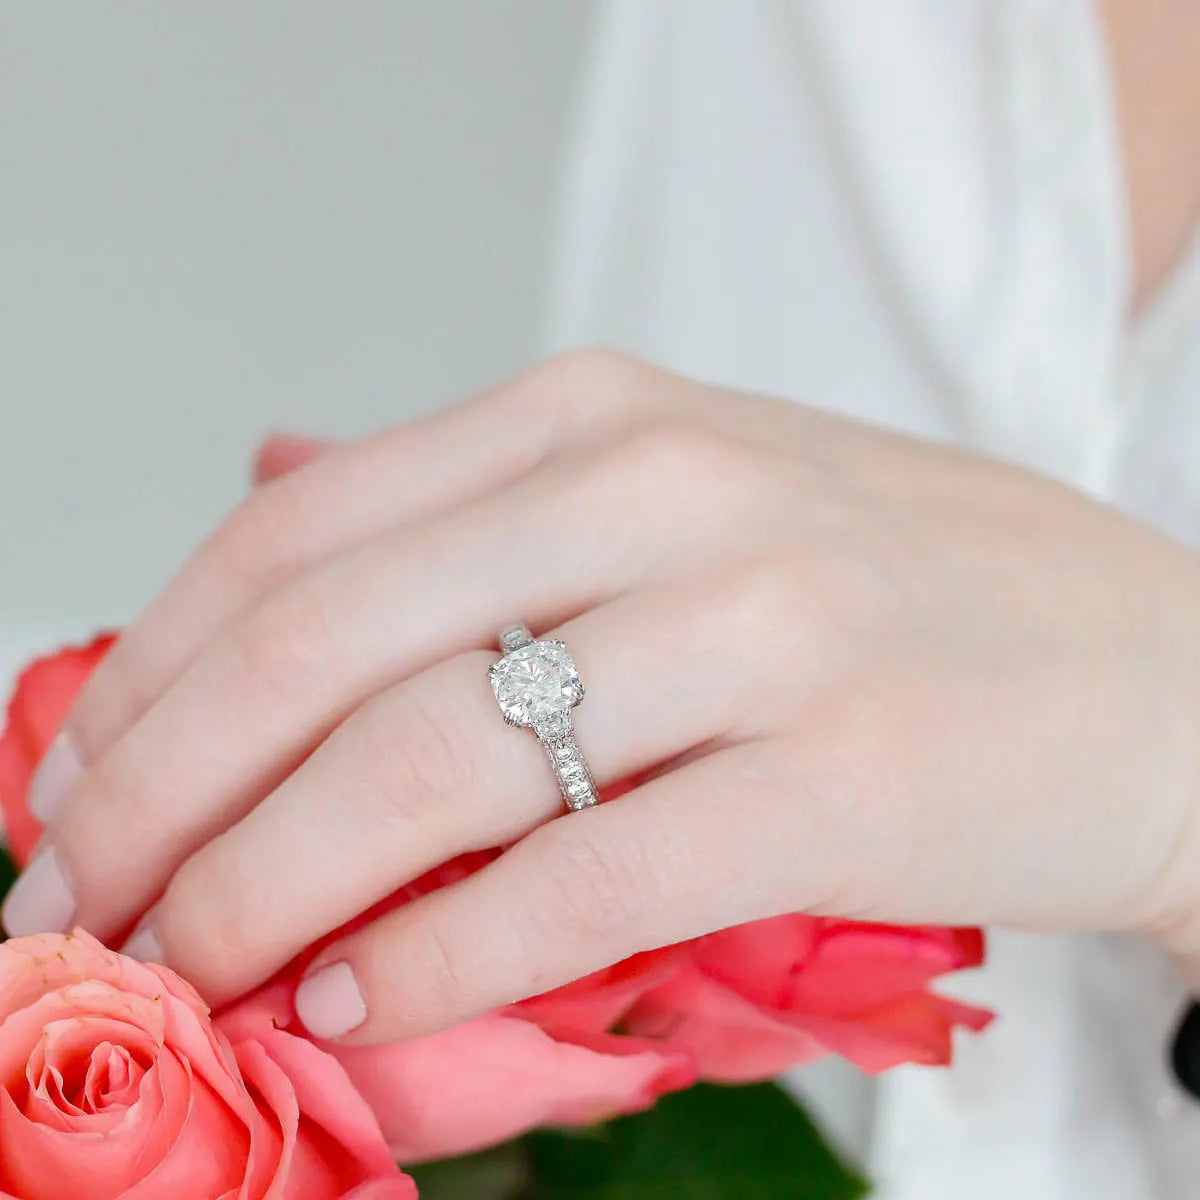 Princess Cut vs. Cushion Cut - What is the Difference?